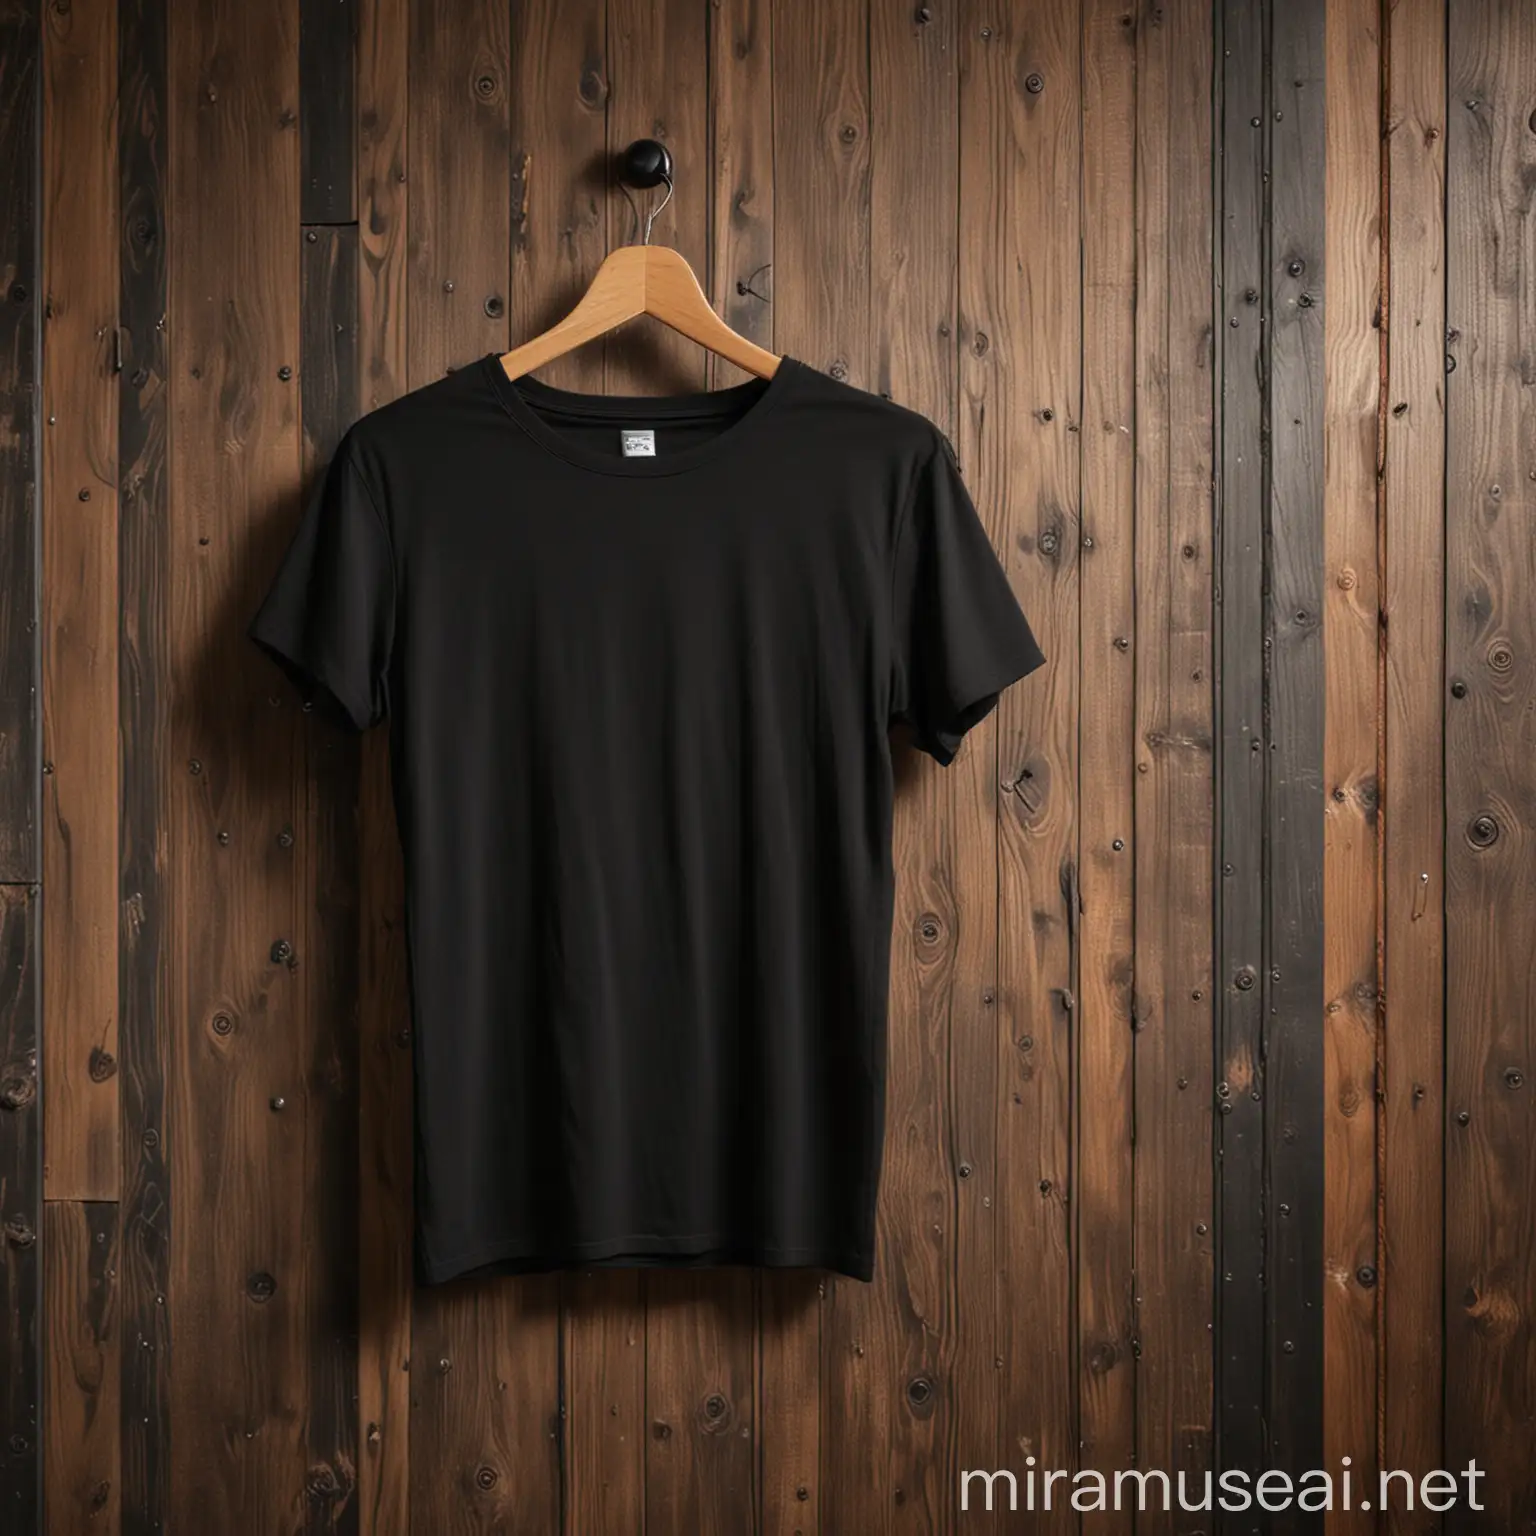 Black Drop Shoulder TShirt Hanging on Wooden Wall with Nail